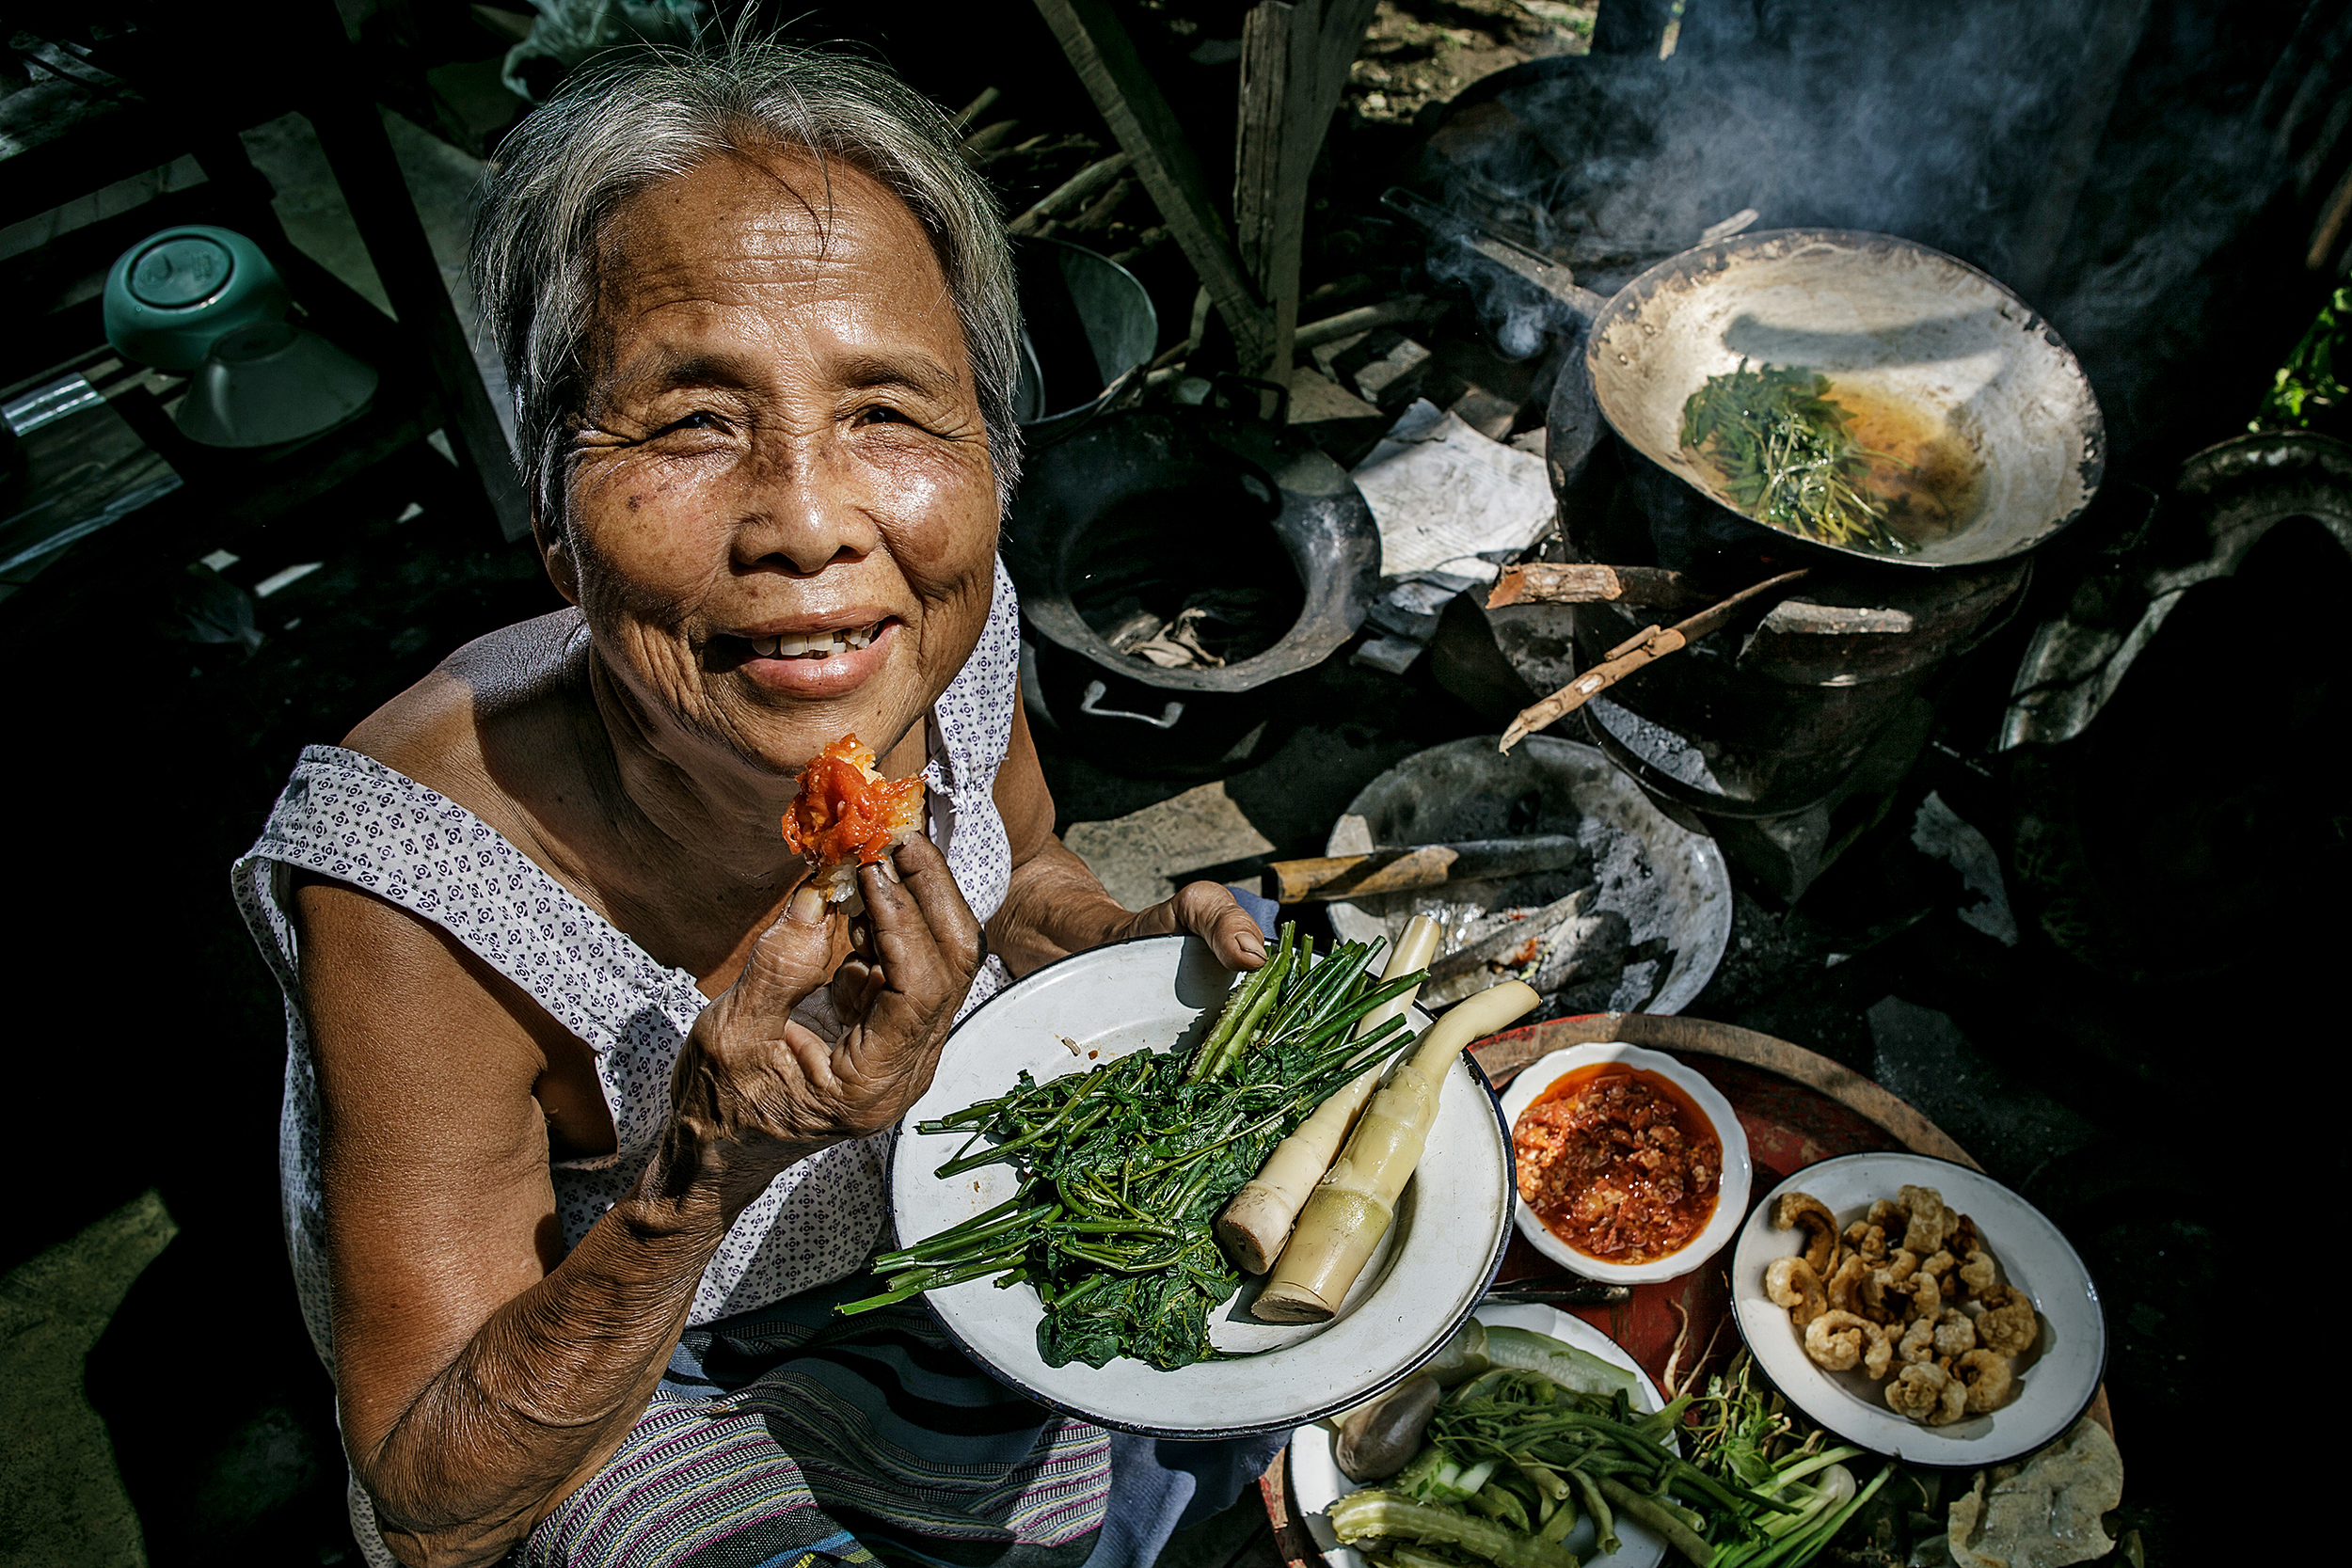 A local woman eating food